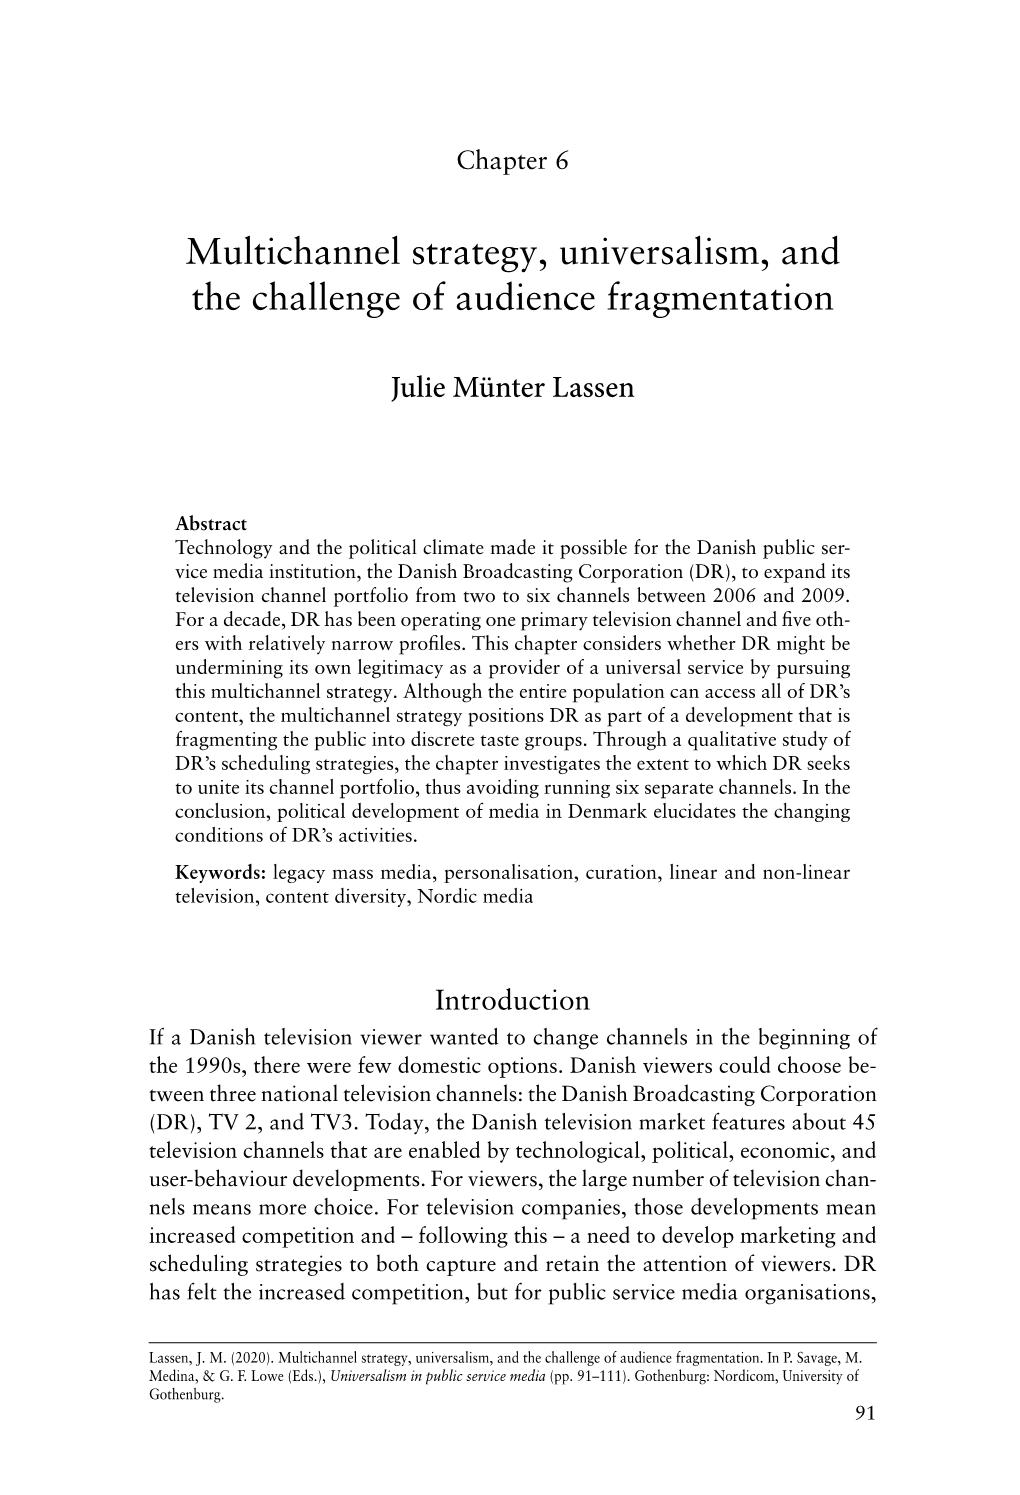 Multichannel Strategy, Universalism, and the Challenge of Audience Fragmentation